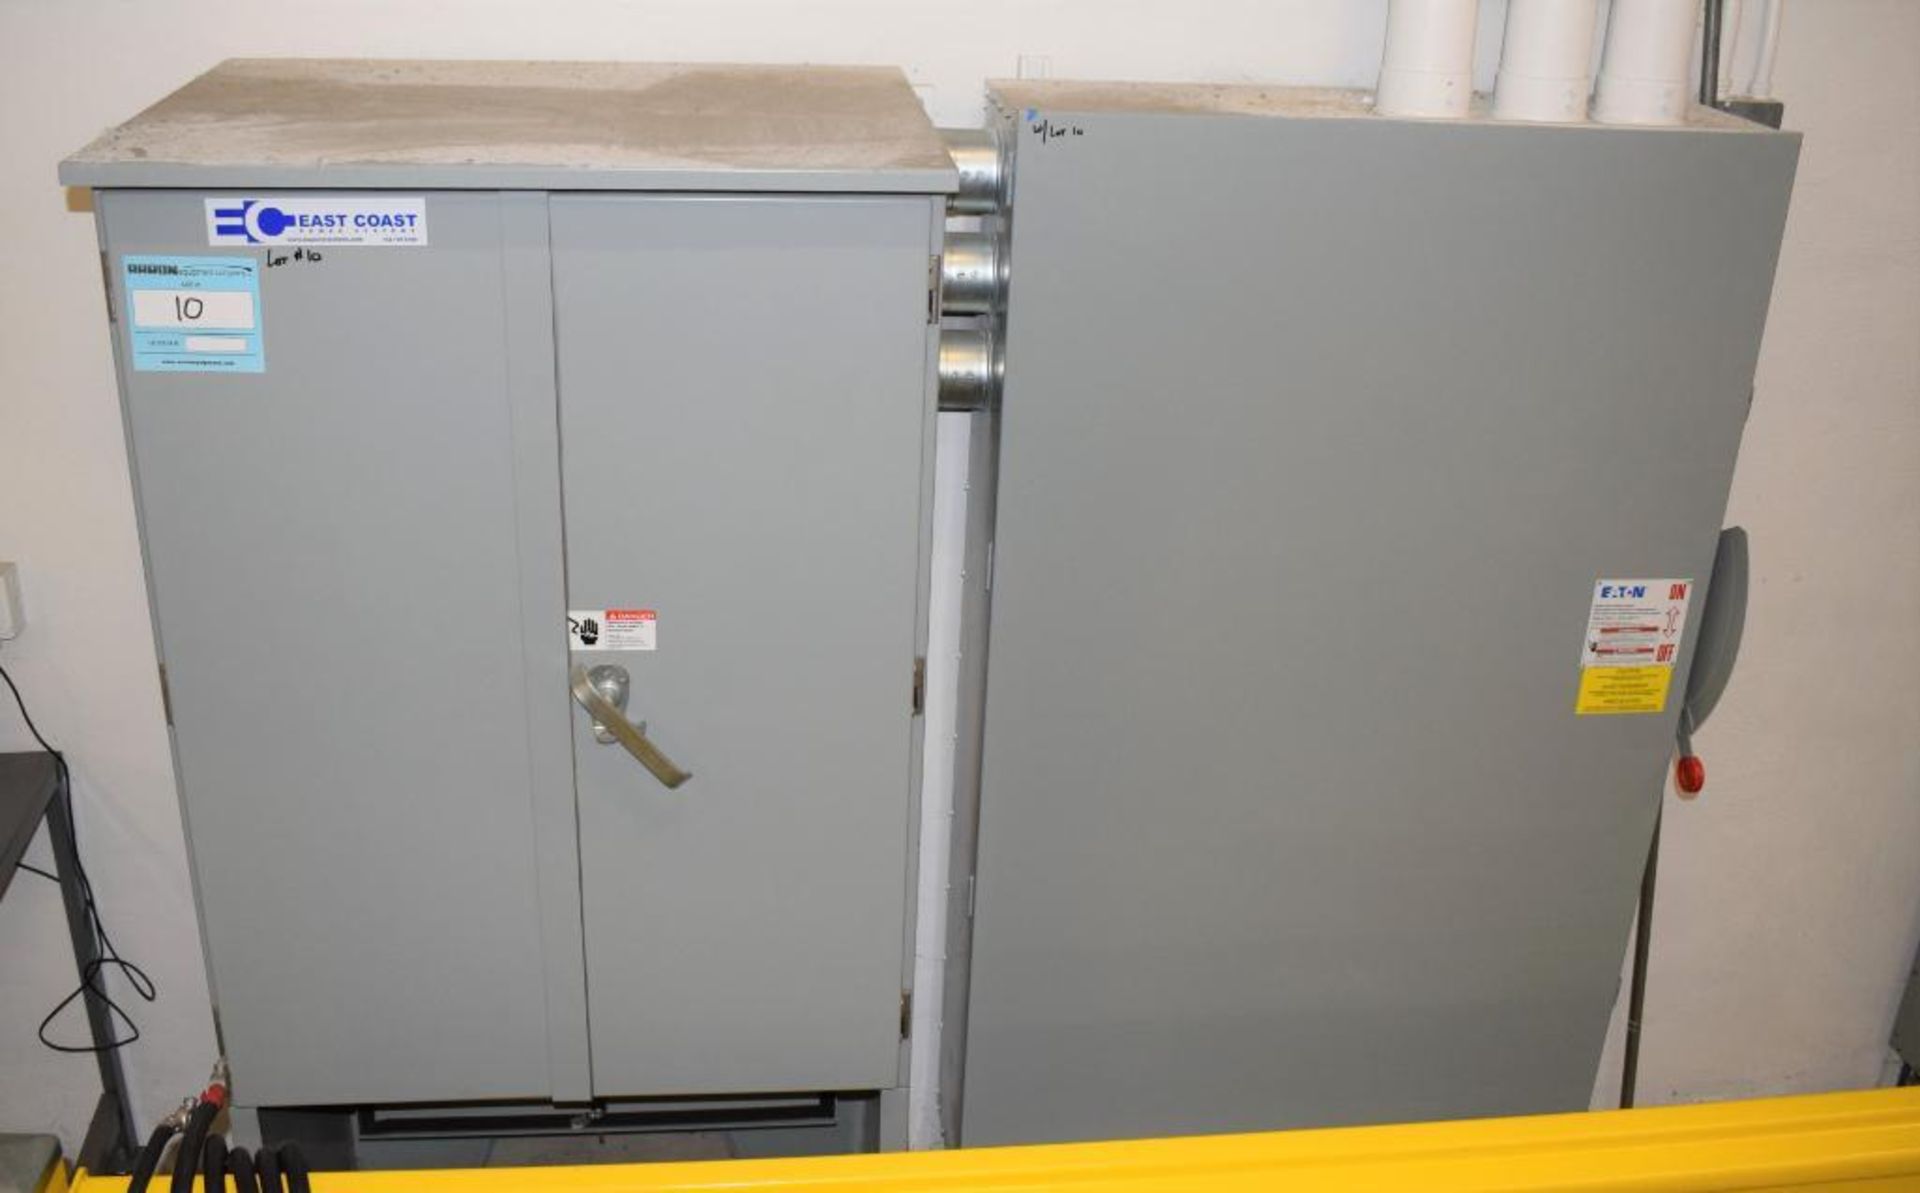 East Coast Panelboard Generator Connection Cabinet, Cat# GCP5-1600S3-2F. Amps 1600A, volts 480/277V,